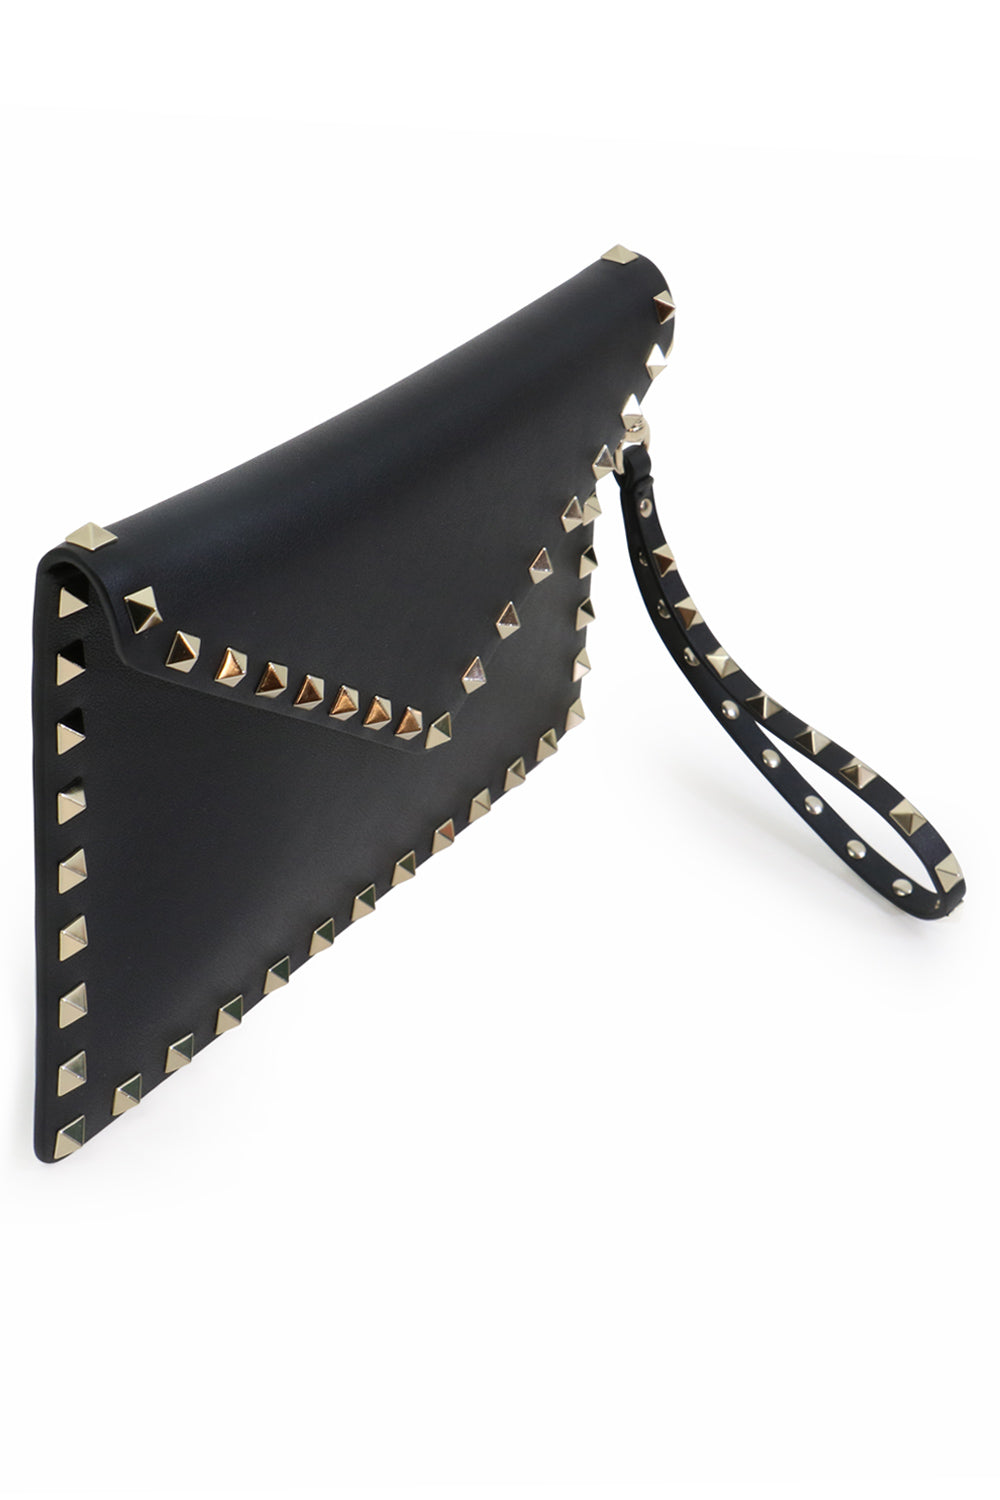 VALENTINO BAGS BLACK SMALL ROCKSTUD ENVELOPE POUCH SMOOTH LEATHER BLACK